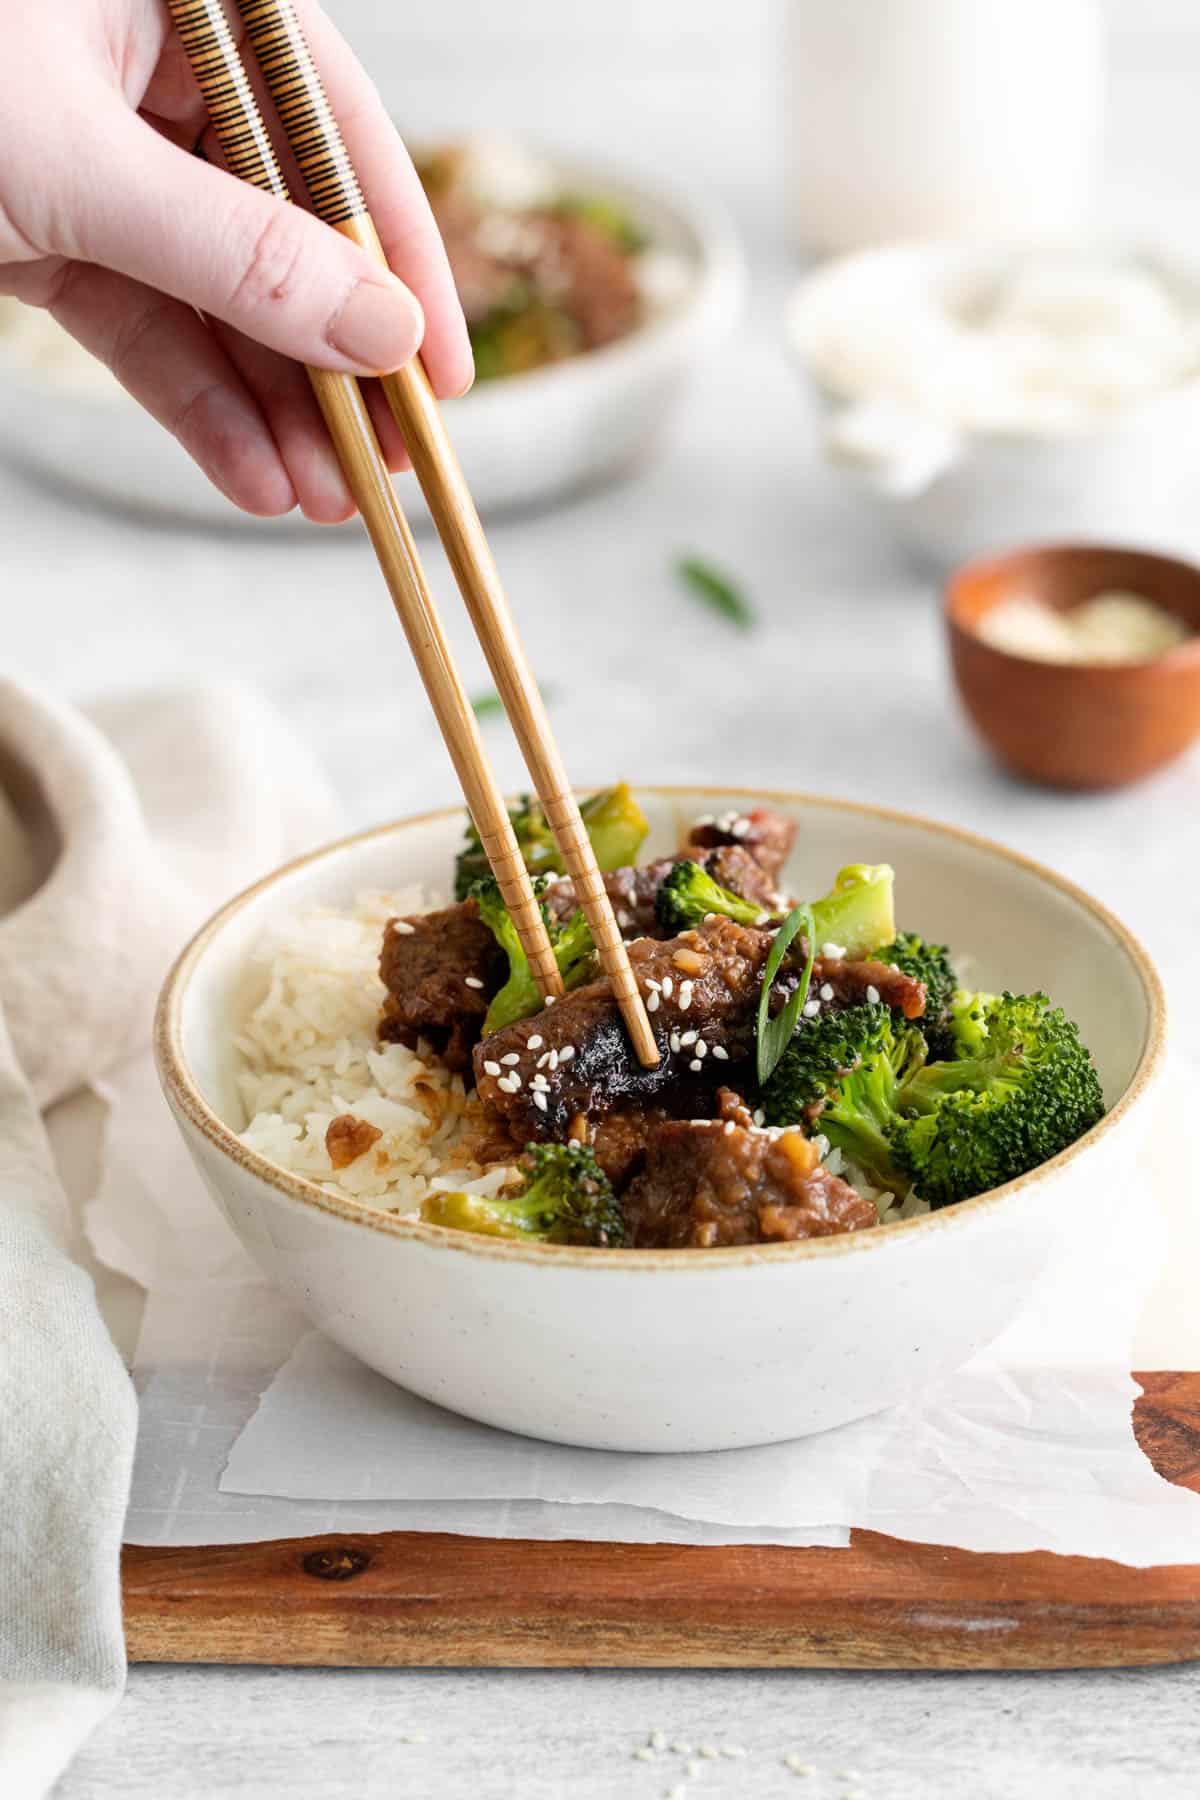 A hand using chopsticks to lift a piece of Mongolian beef from a bowl.